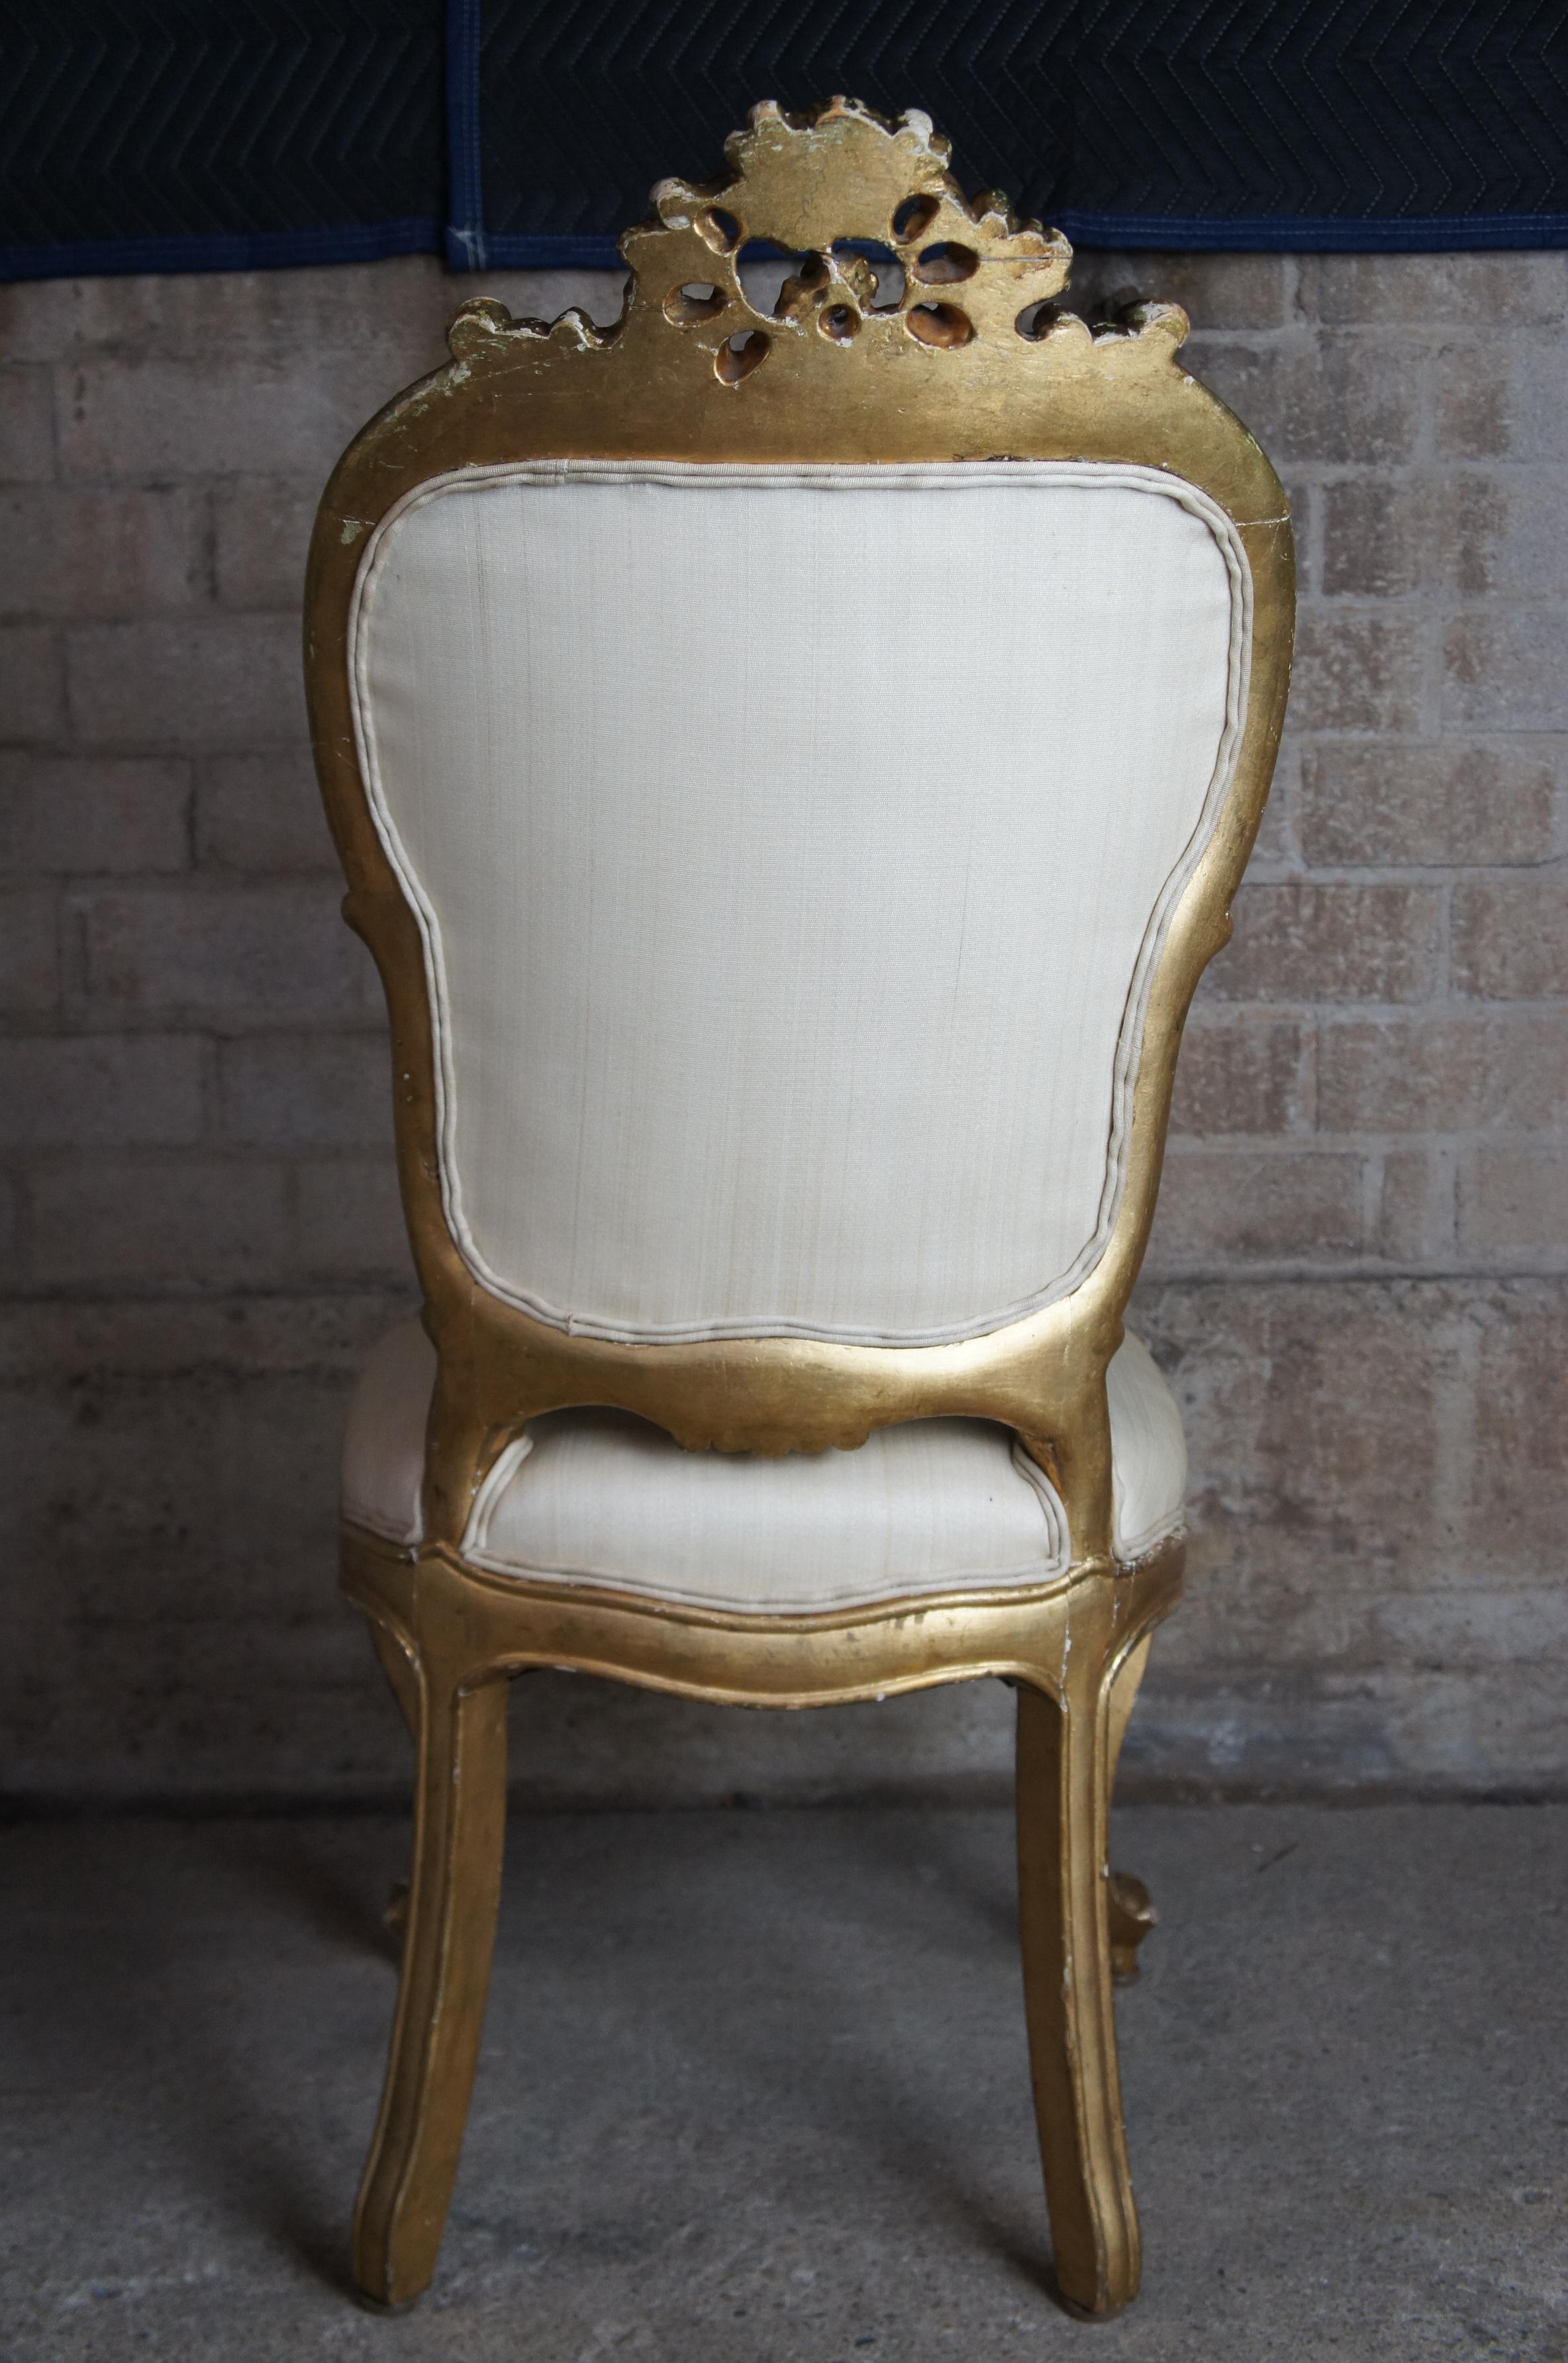 8 Antique Swedish 18th Century Baroque French Louis XV Rococo Gilt Dining Chairs For Sale 1